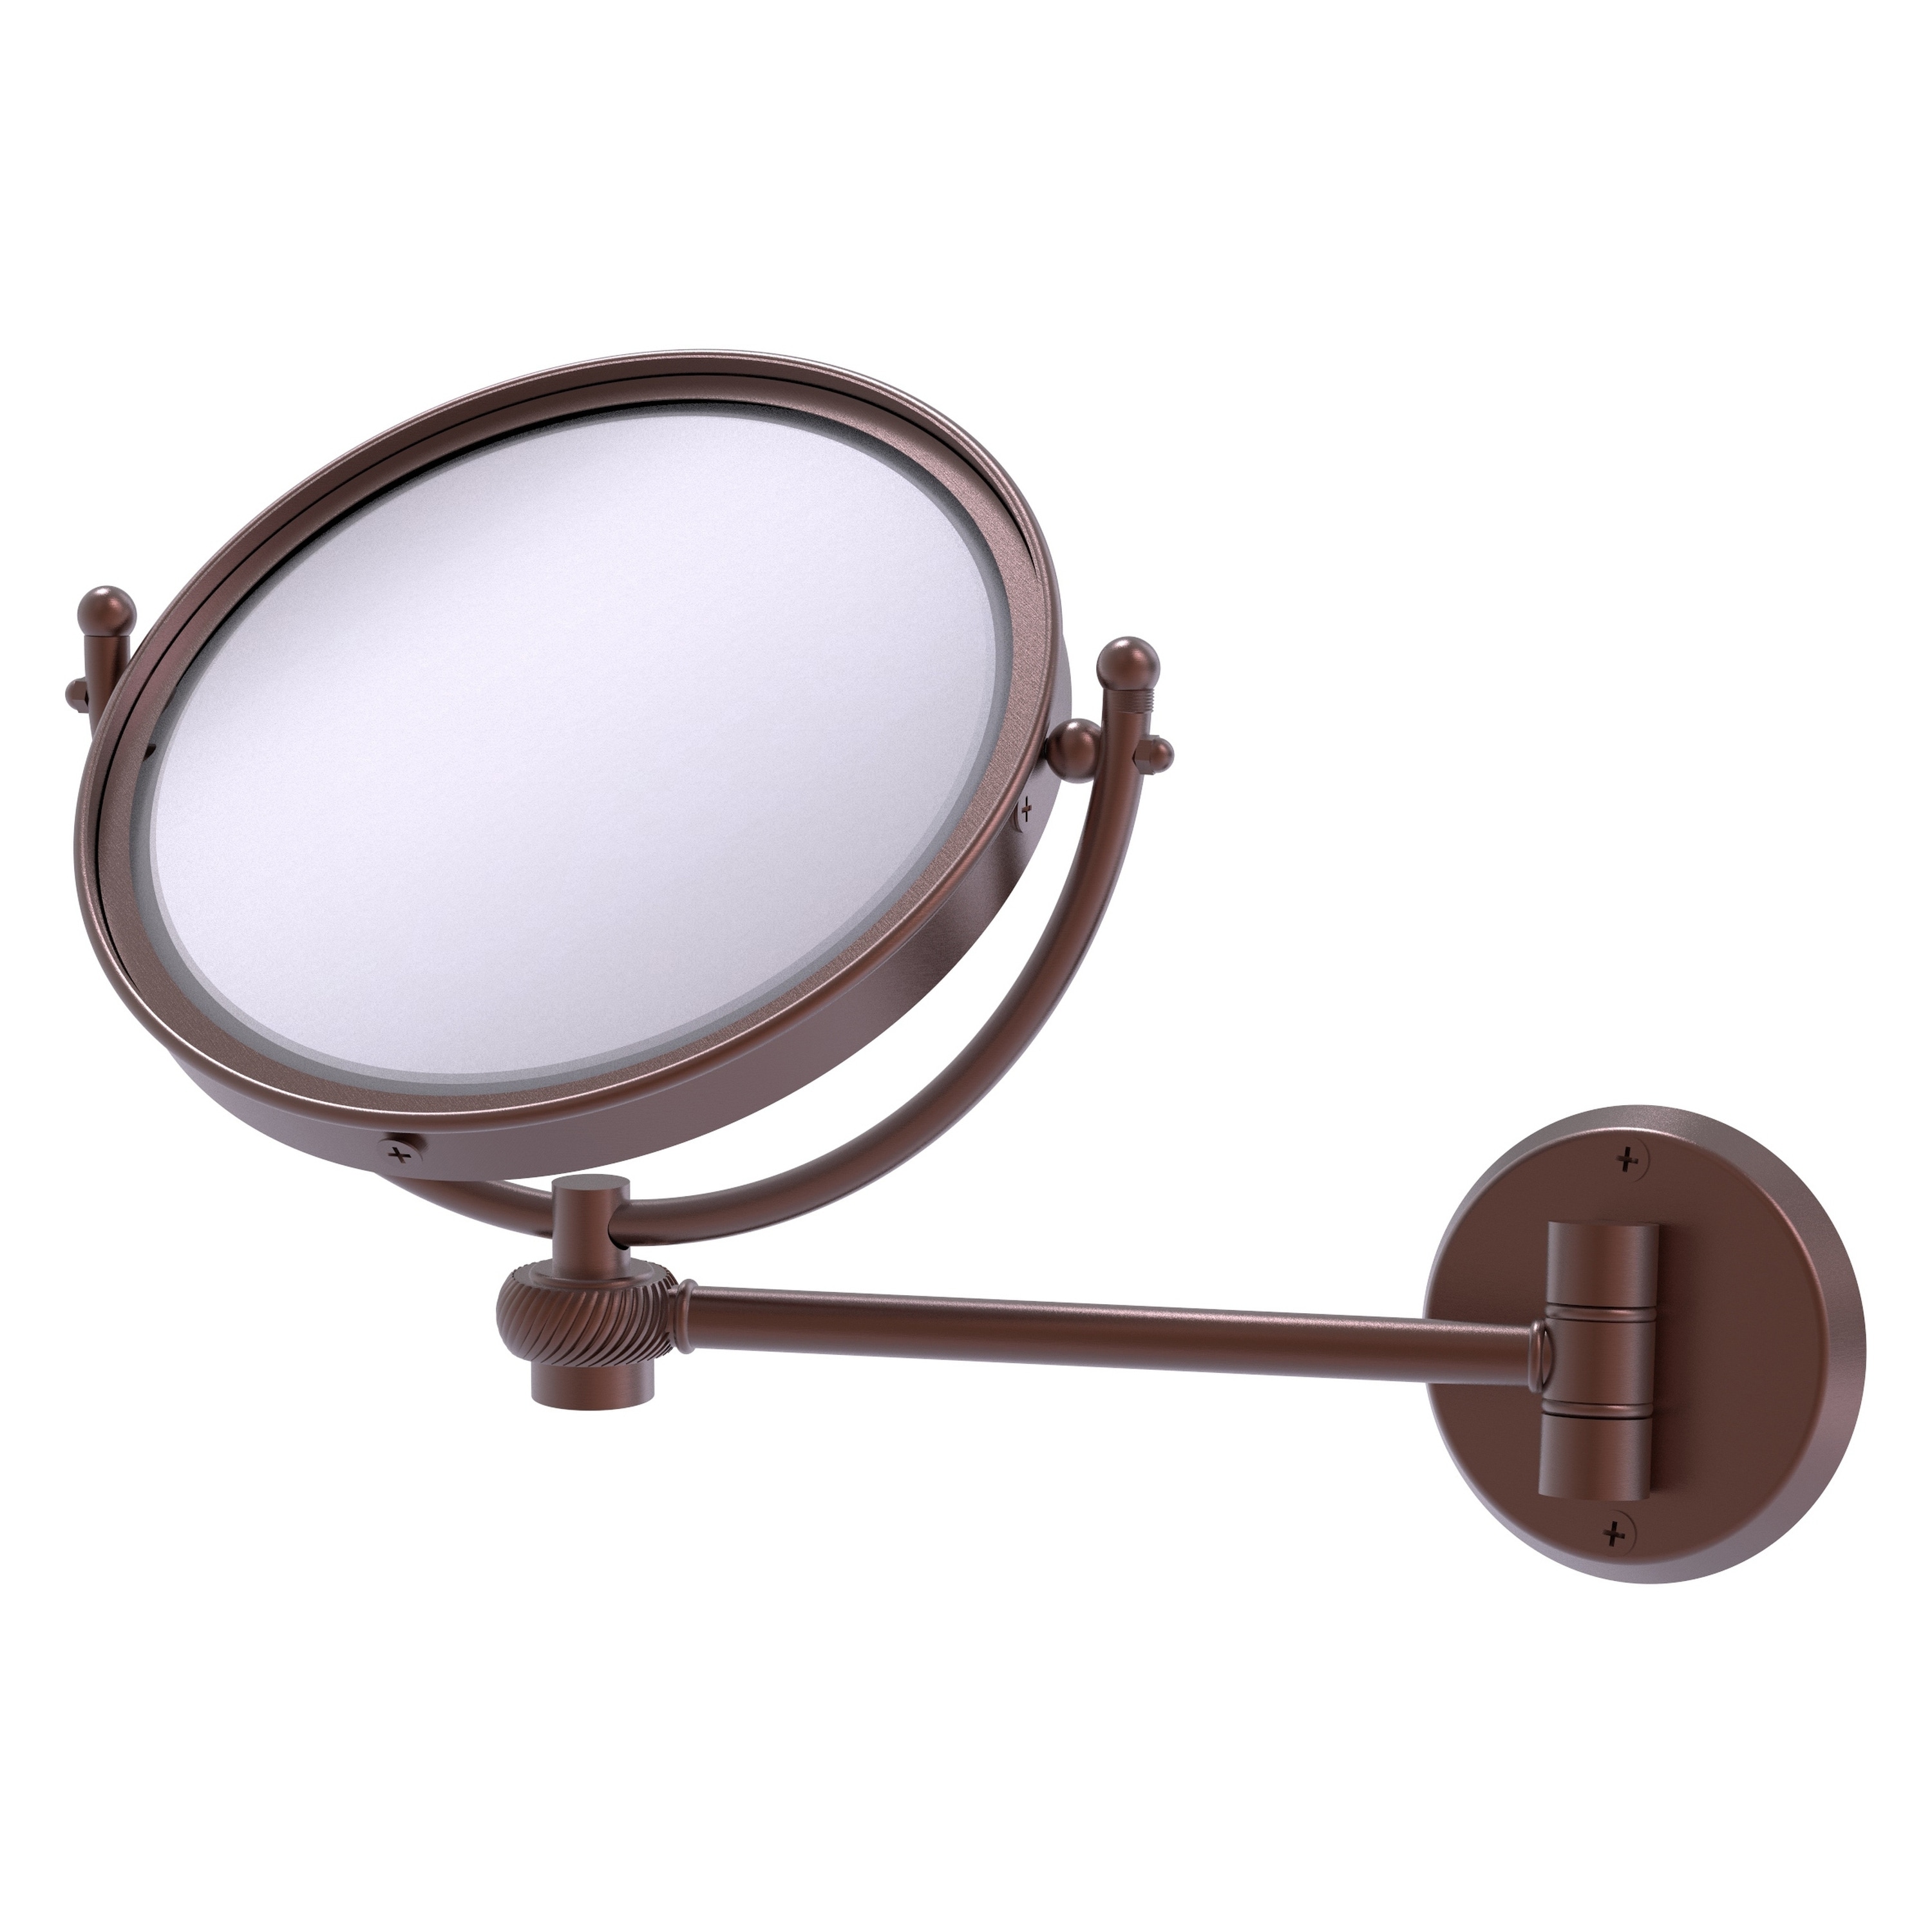 8-in x 10-in Antique Copper Double-sided 2X Magnifying Wall-mounted Vanity Mirror | - Allied Brass WM-5T/2X-CA